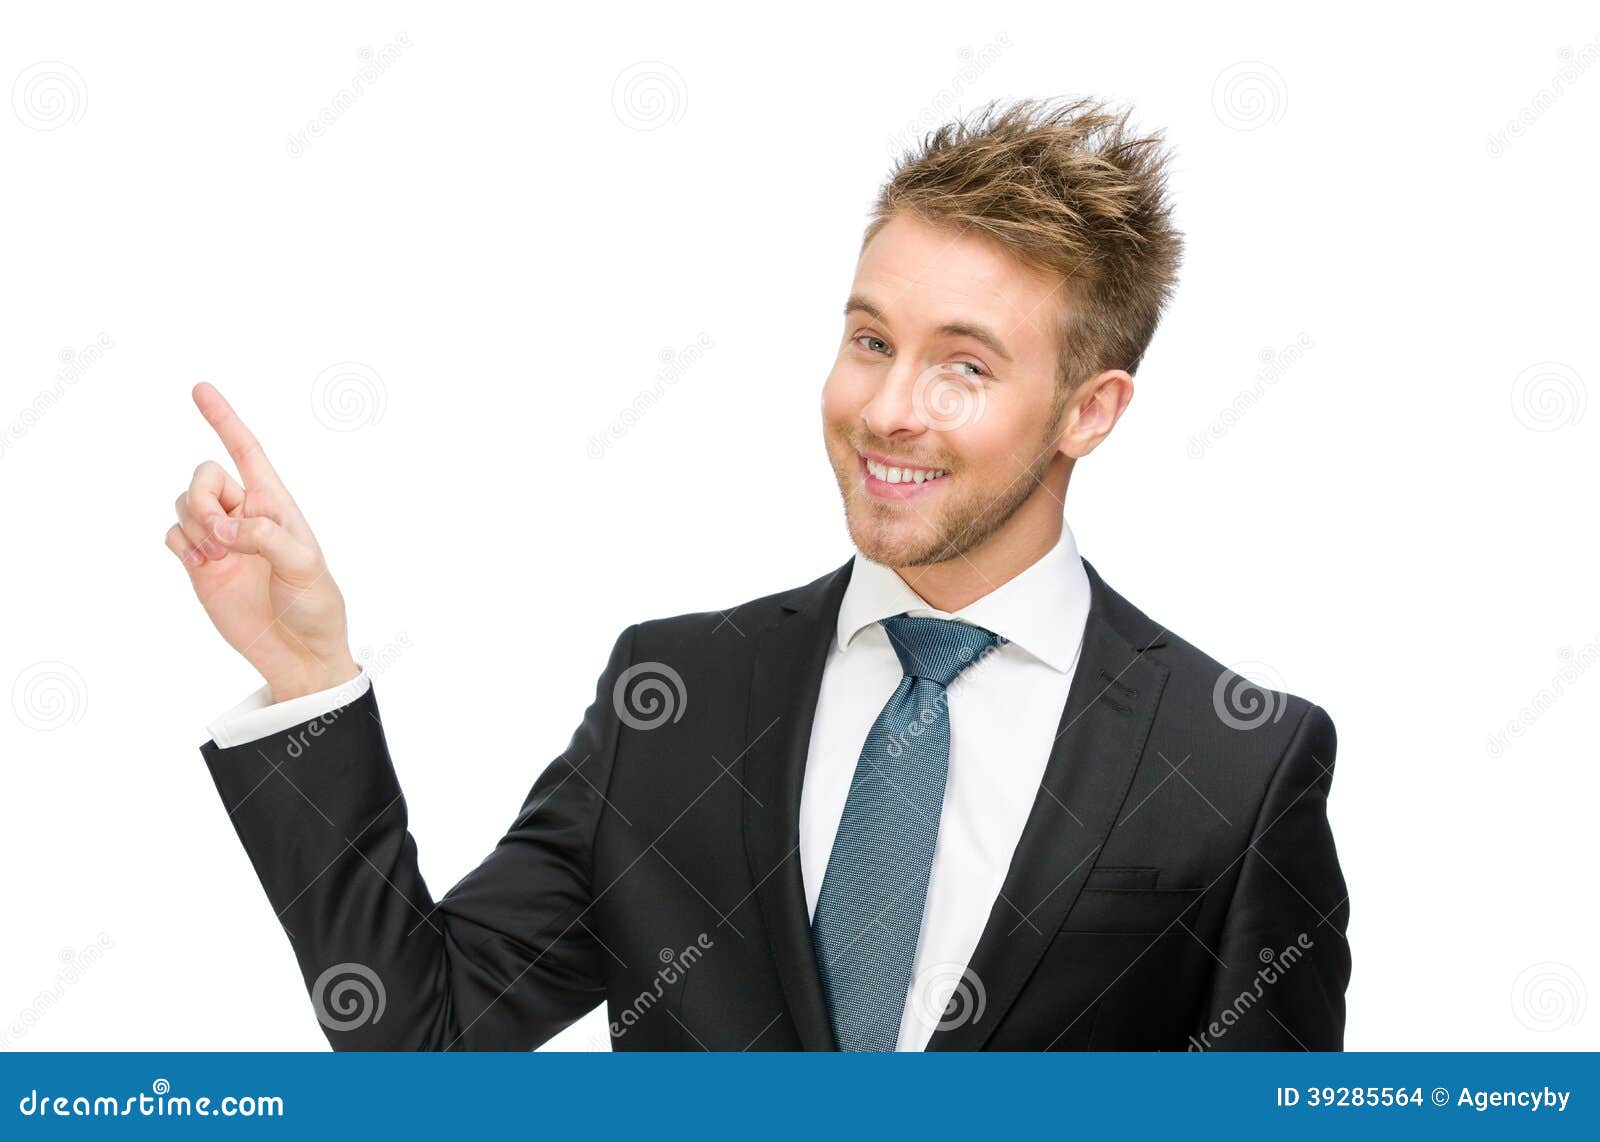 Man Points His Finger Menacingly. Stock Photo - Image of gesture, manager:  82781692